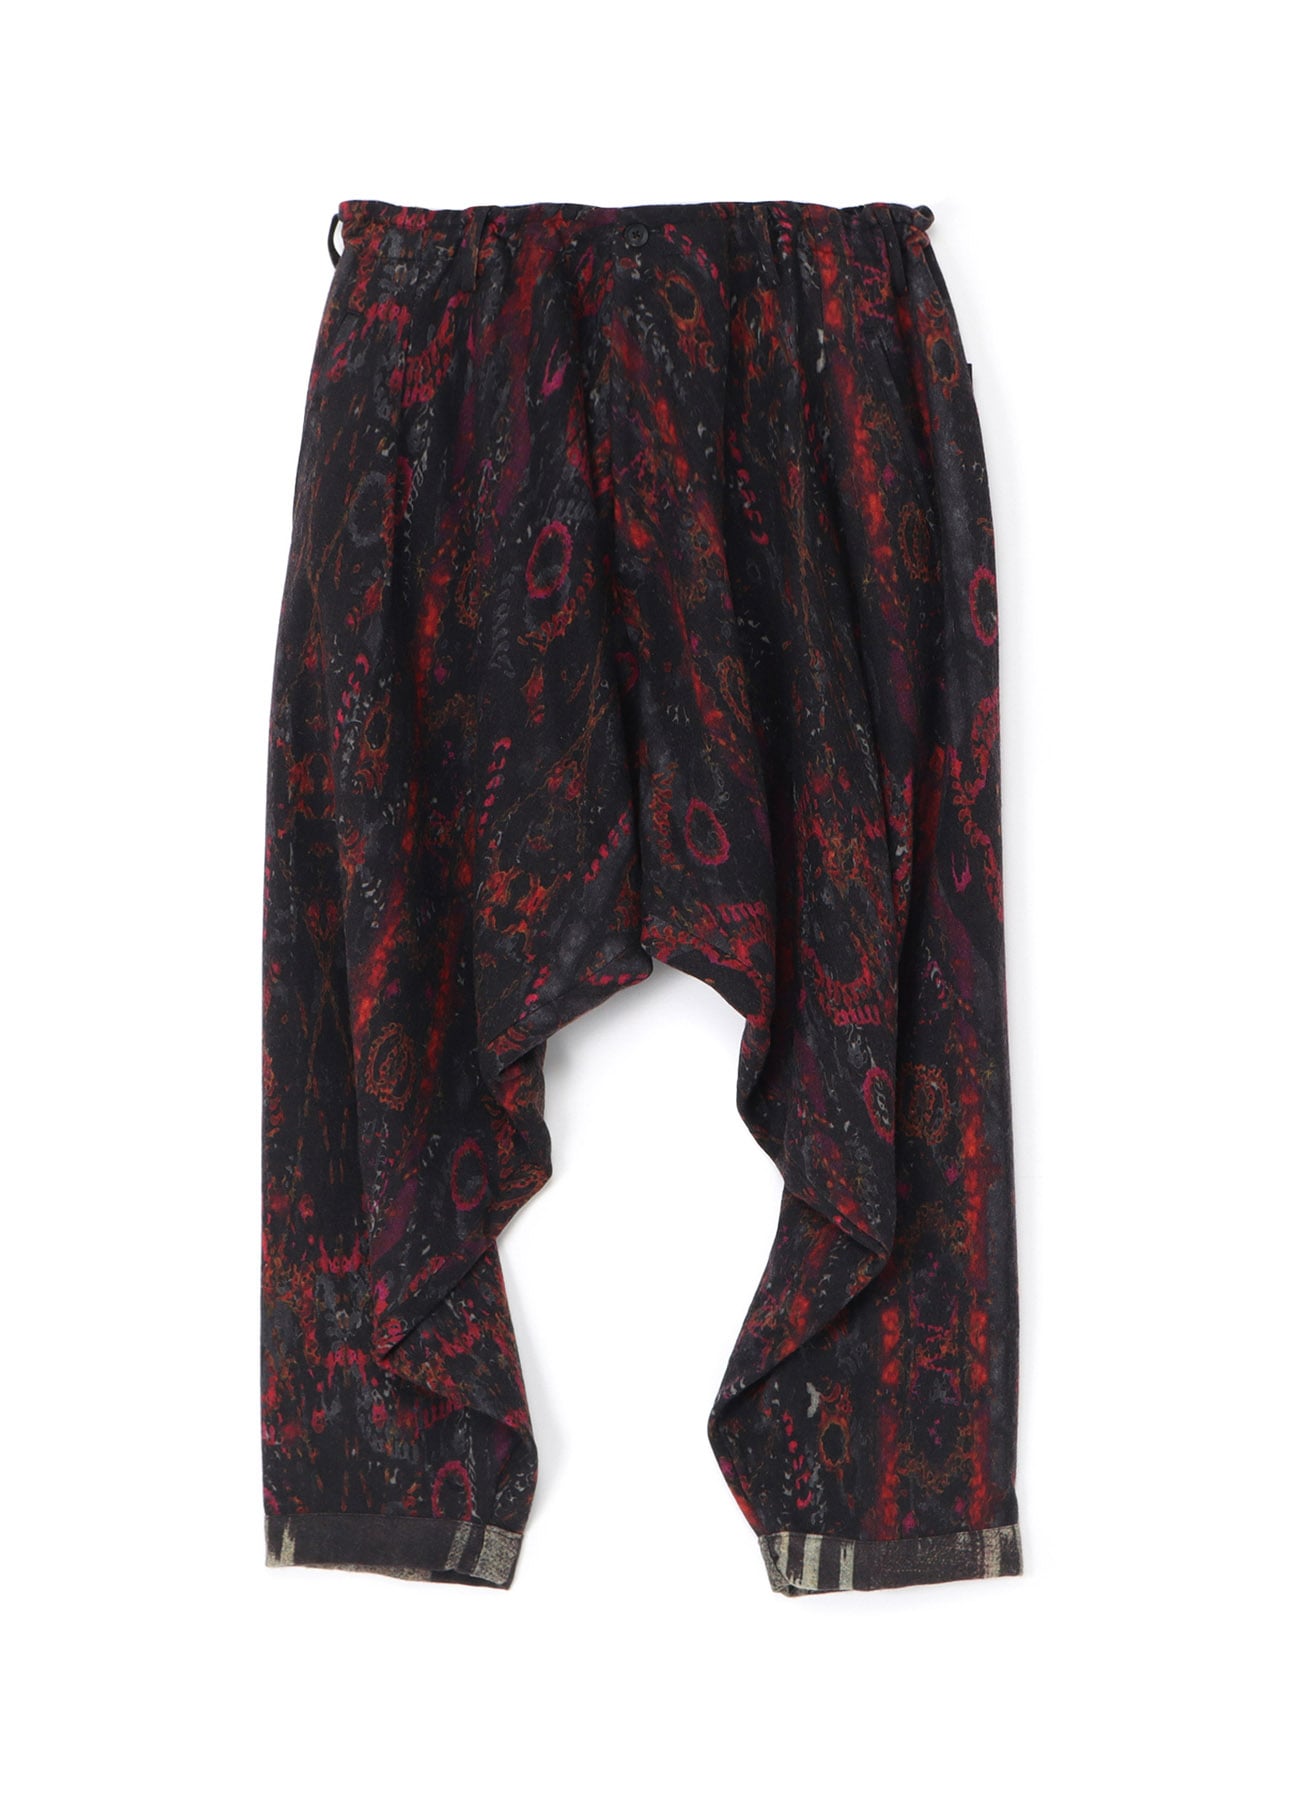 CENTRAL ASIAN PATTERN PANTS